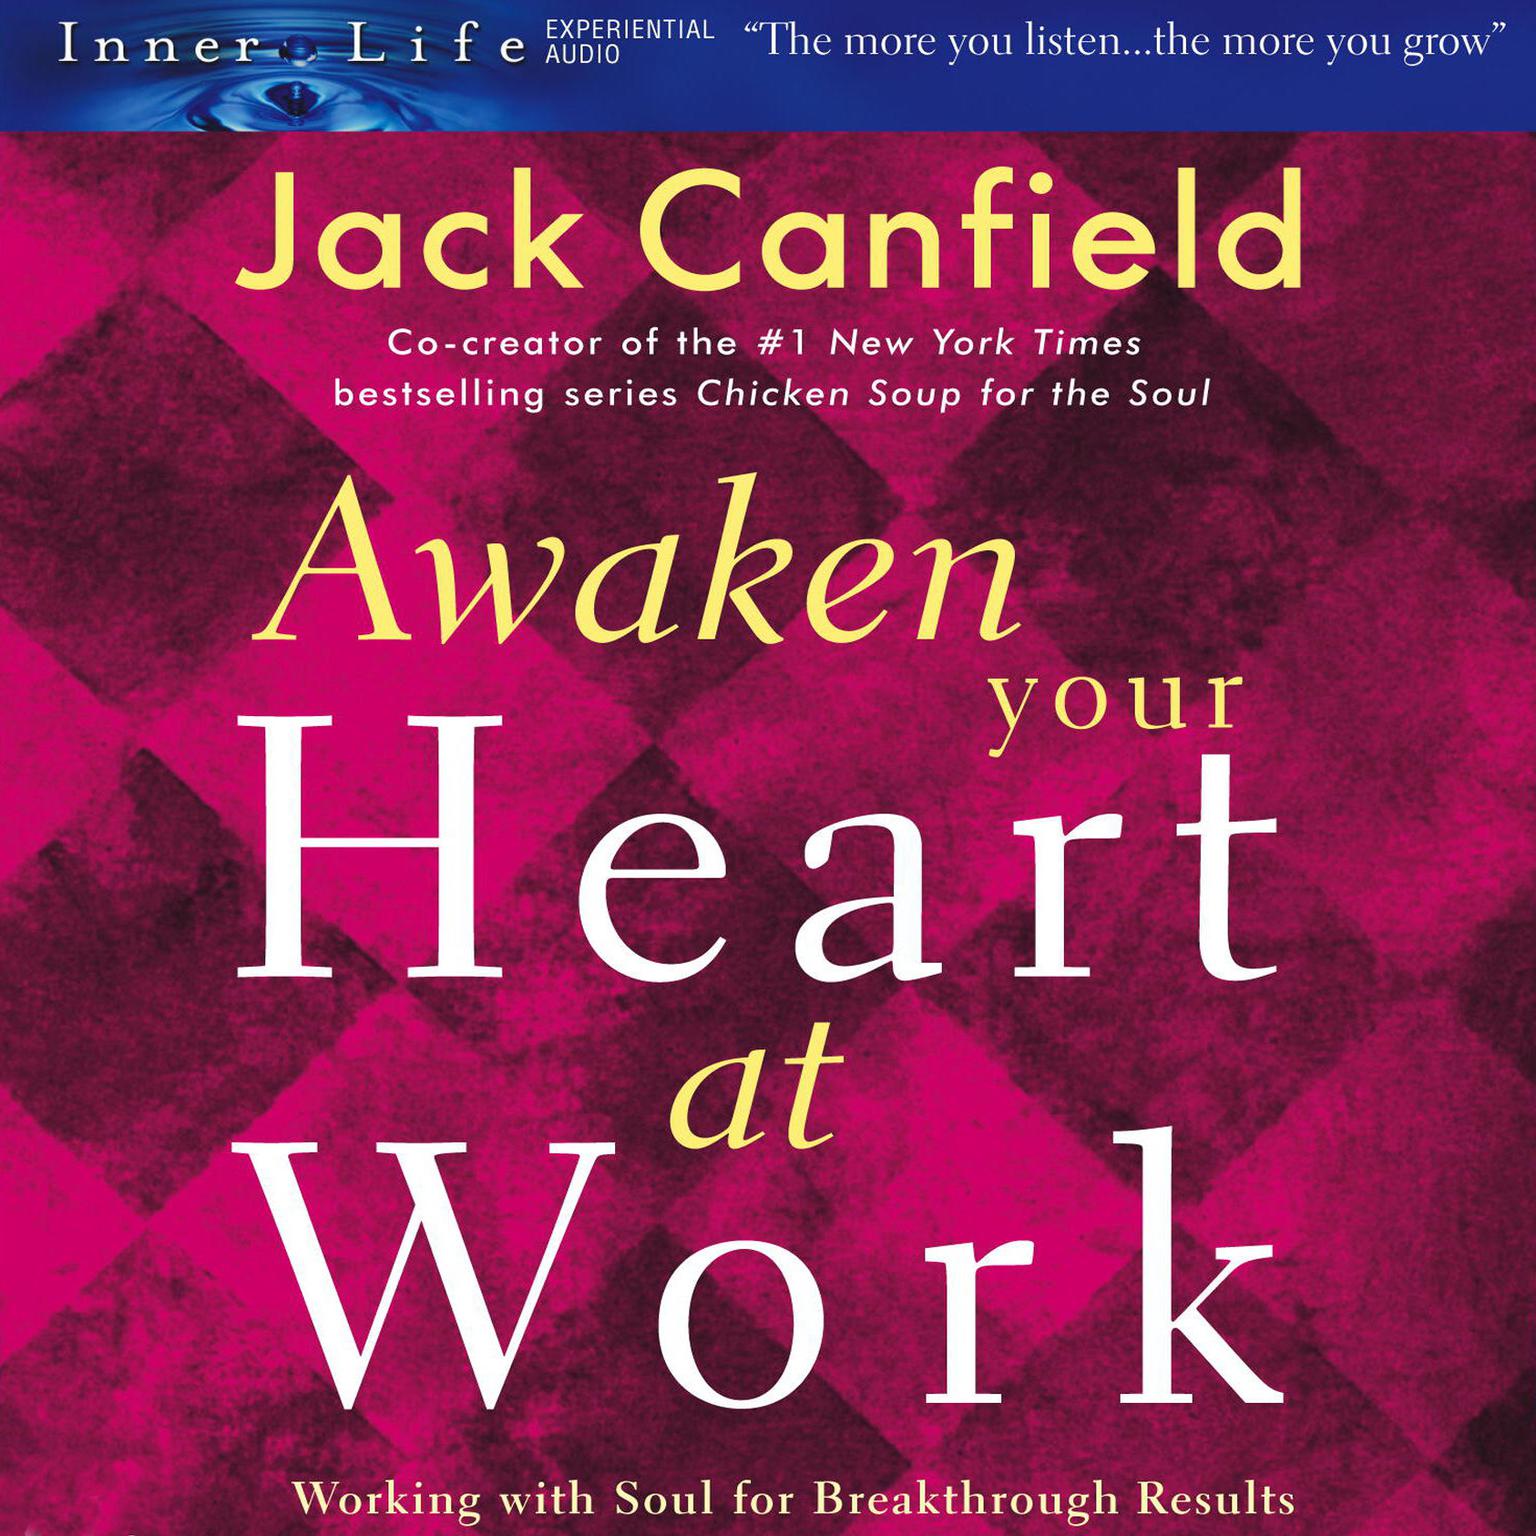 Awaken Your Heart at Work (Abridged): Working with Soul for Breakthough Results Audiobook, by Jack Canfield